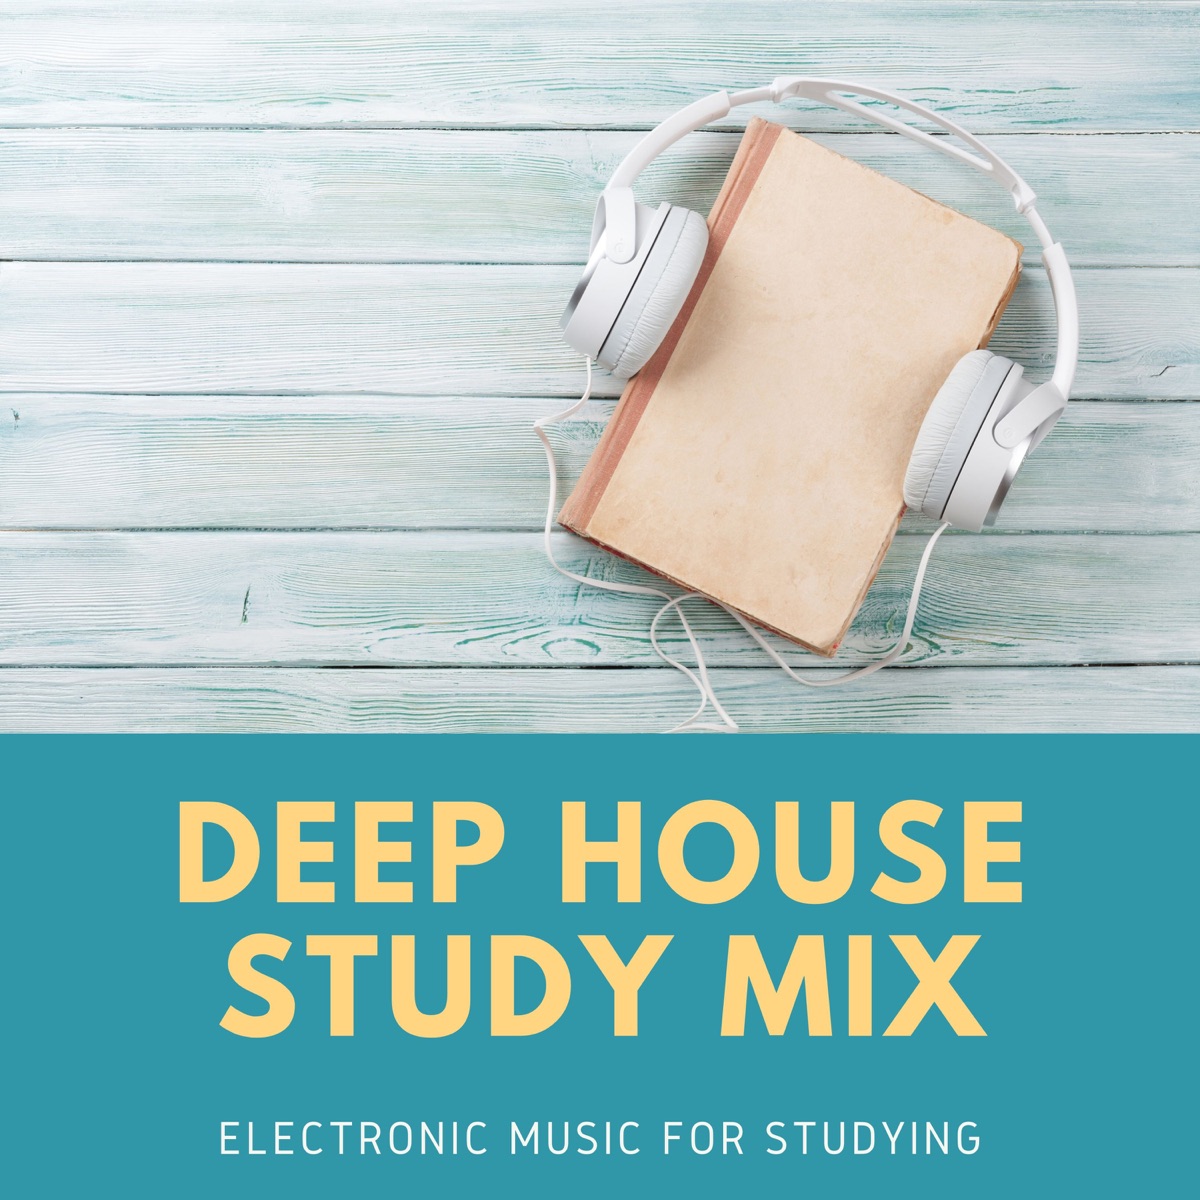 Deep House Study Mix – Electronic Music for Studying, Concentration by  Alexander Focus on Apple Music